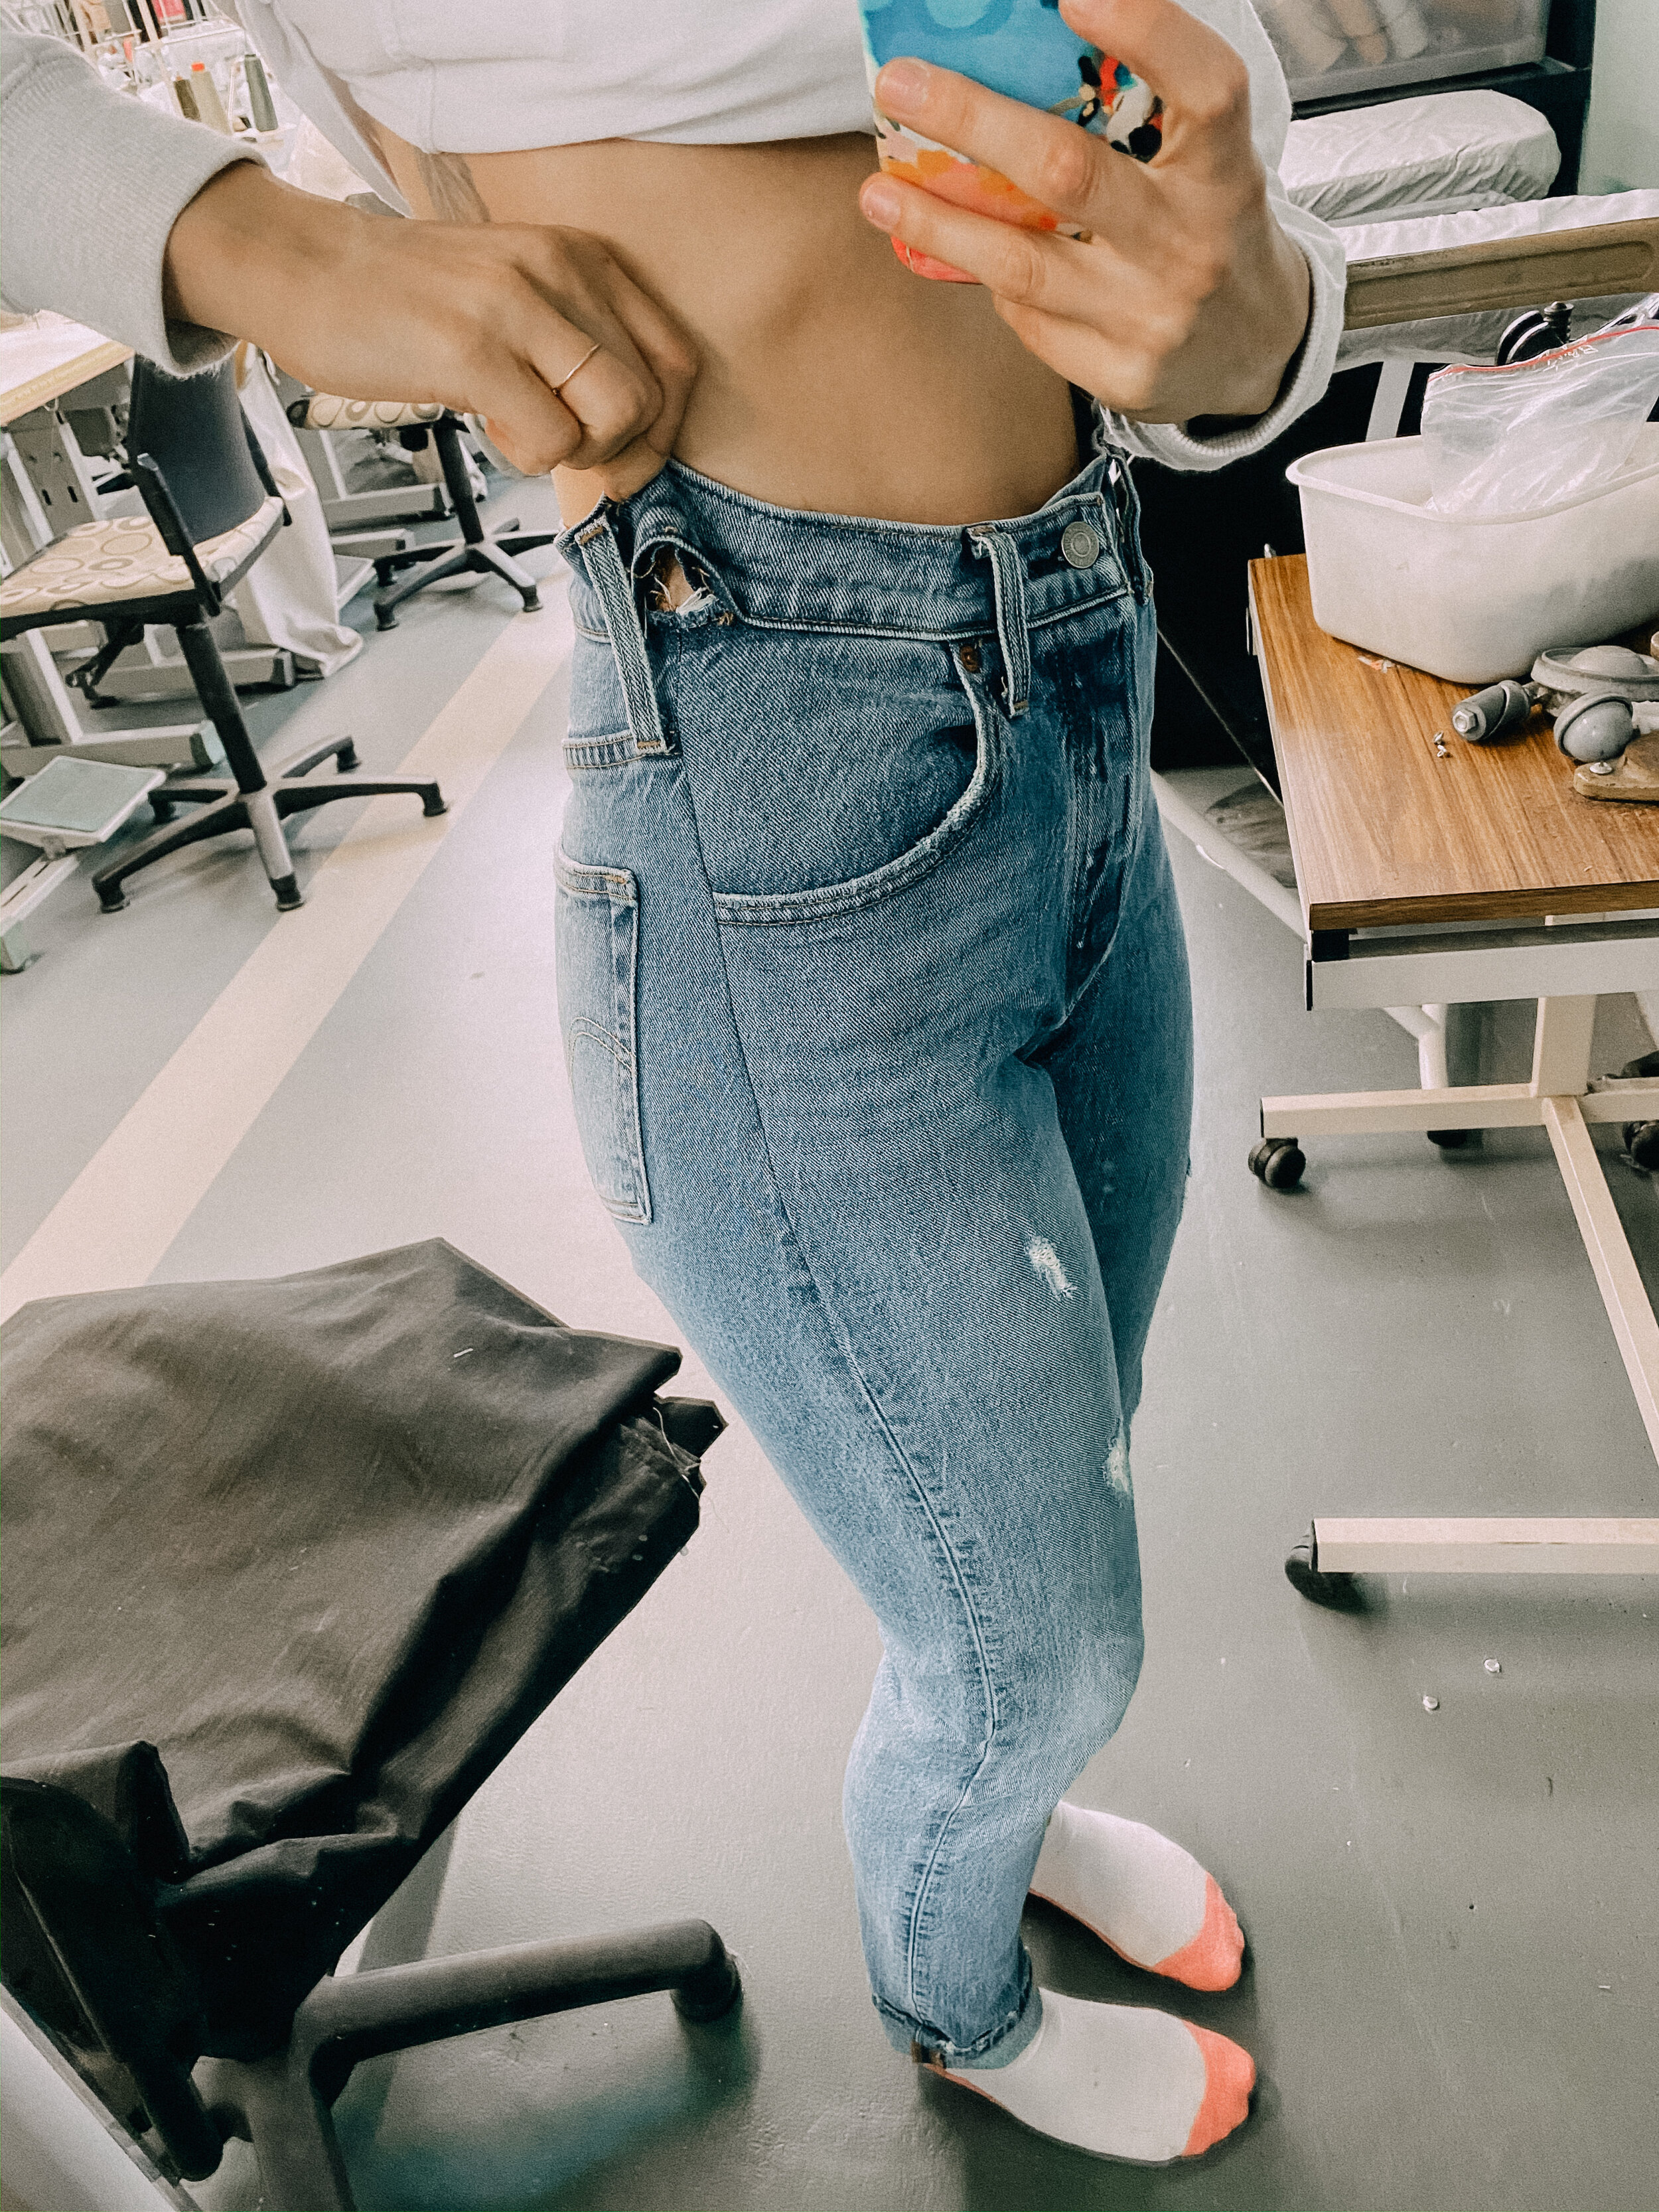 Jeans Alteration: How to size down Denim Jeans at the waist